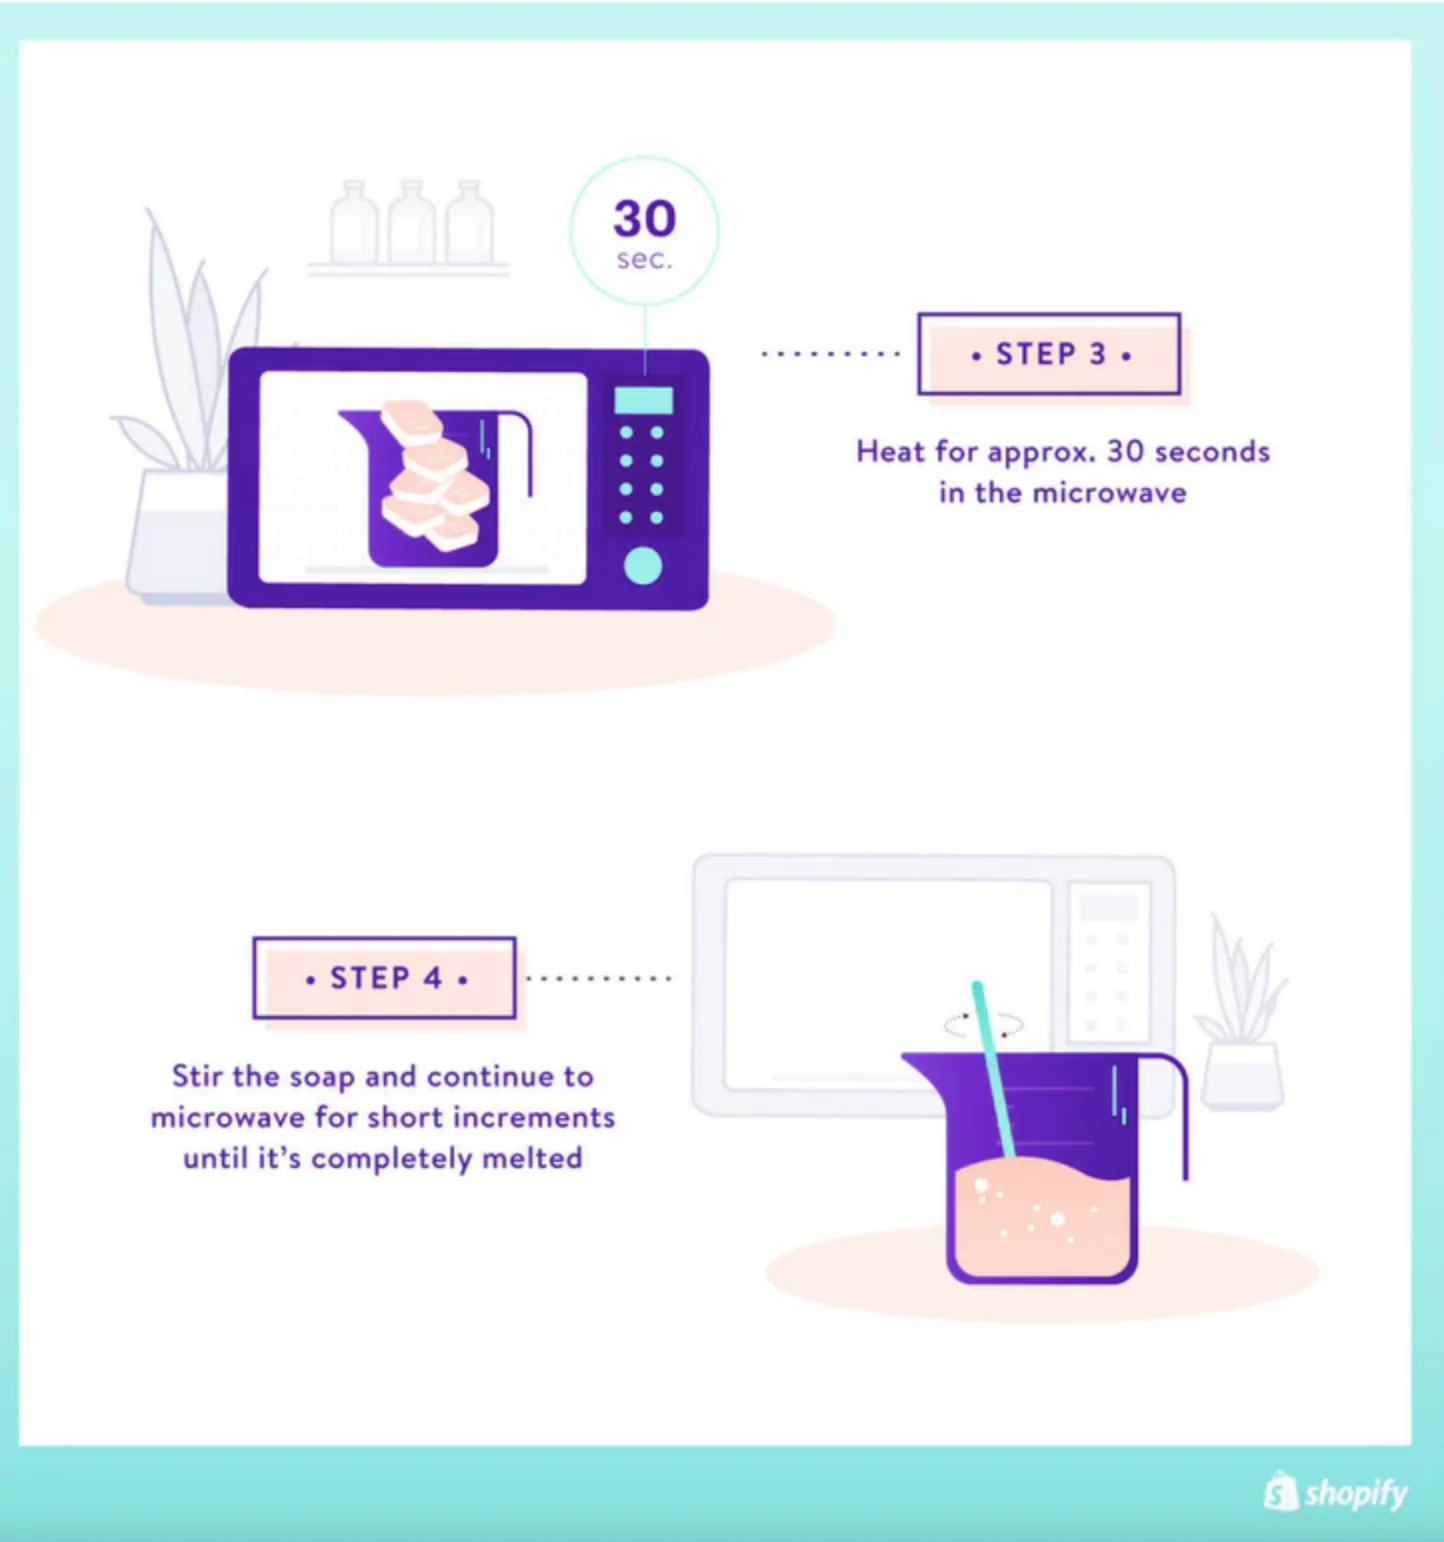 Illustration showing step 3 (microwaving for 30 sec.) and step 4 (stir and microwave in short increments until melted) for making soap